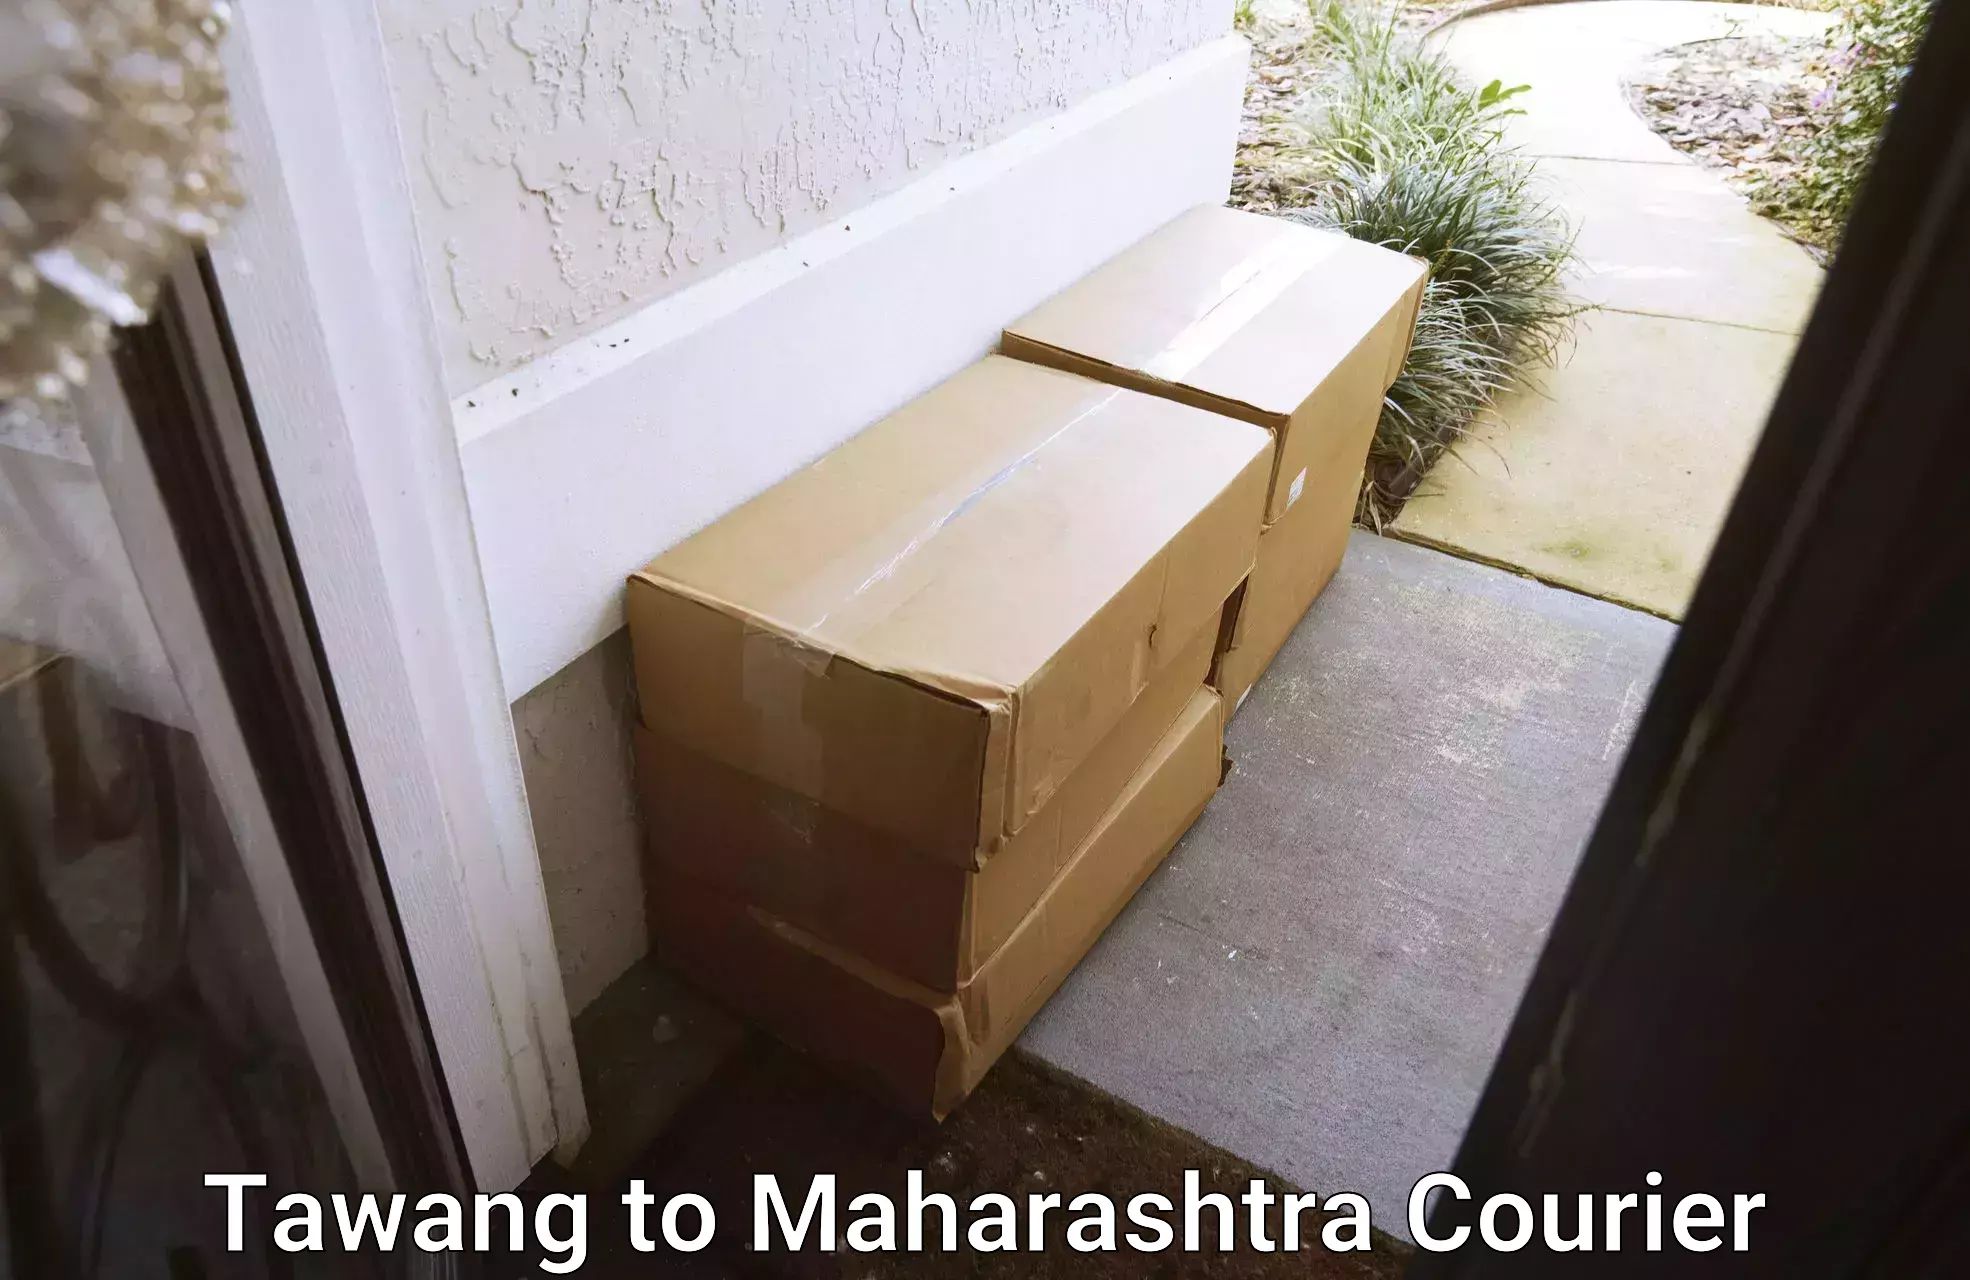 Parcel service for businesses Tawang to Hingoli